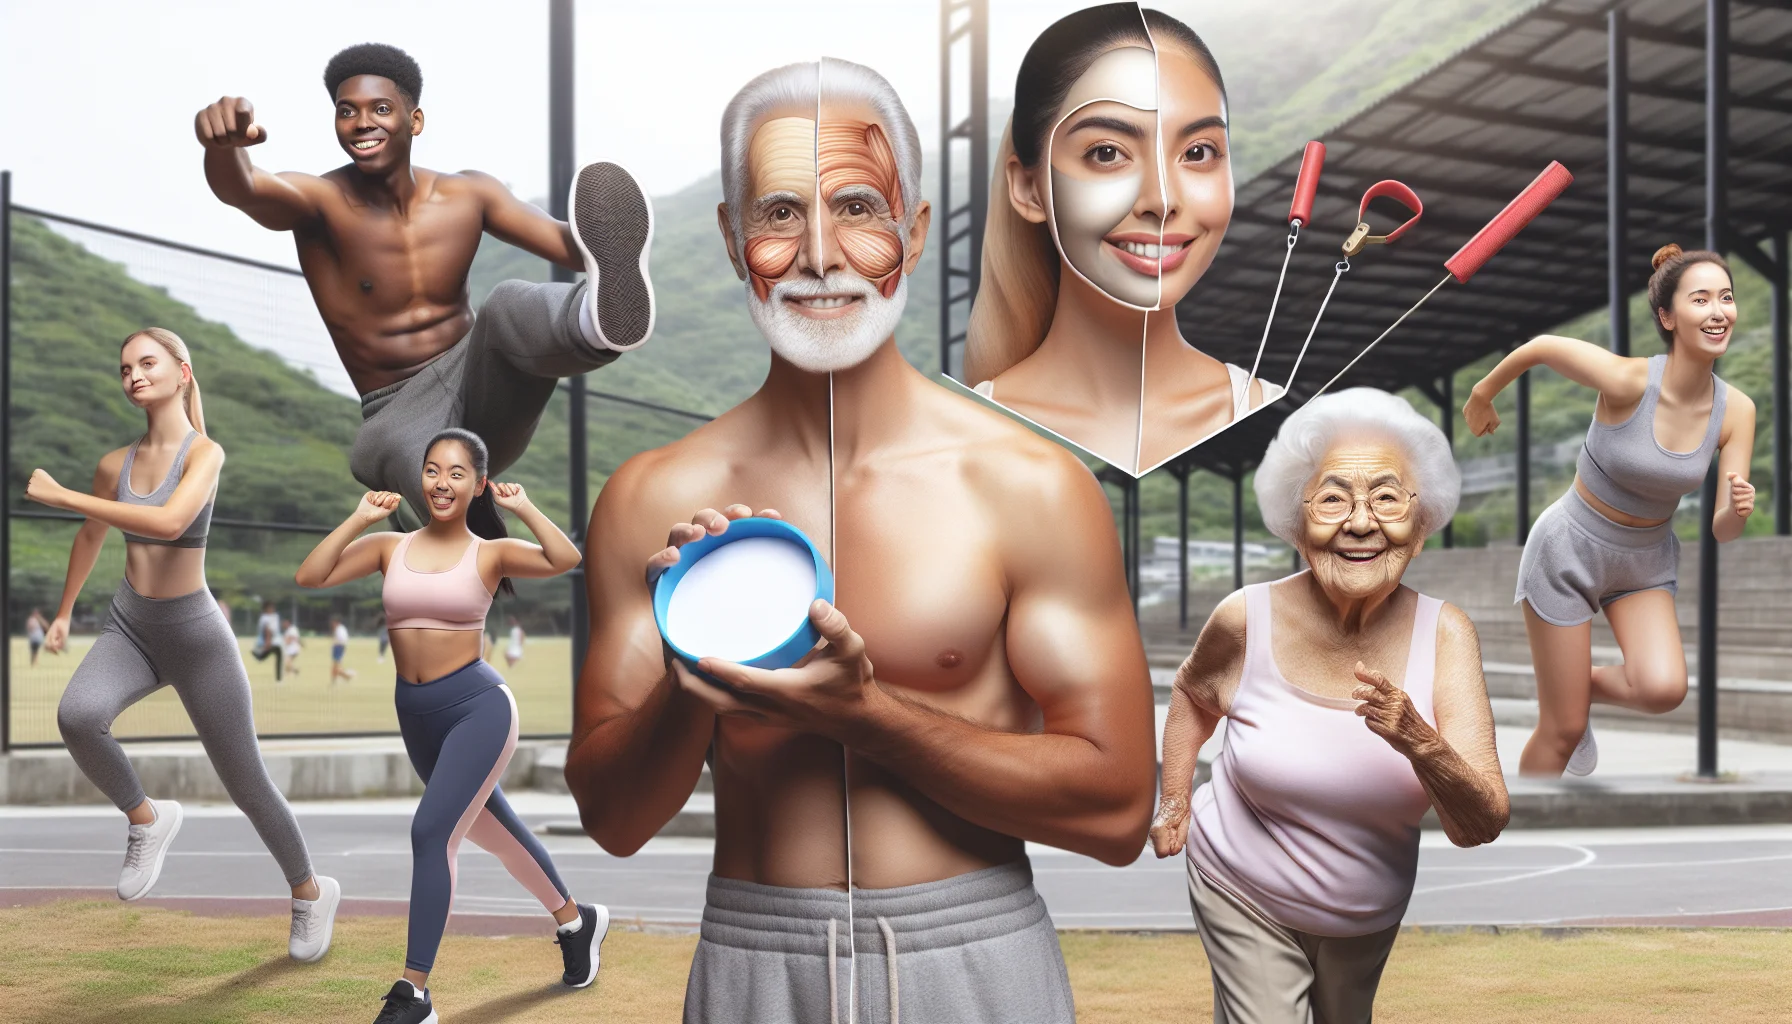 Craft a humorous and appealing image that reveals the secret to firm and youthful skin. The scene should be set in an outdoors location, perhaps a park or a beach, promoting the idea of exercise. The image should consist of a group of diverse individuals including a Middle Eastern man, a South Asian woman, a Black elderly gentleman, and a Hispanic young woman, all participating in different engaging activities like yoga, playing frisbee, running or using resistance bands. Each person's face shows their clear, youthful, and glowing skin to emphasize the benefits of exercise on skin health.